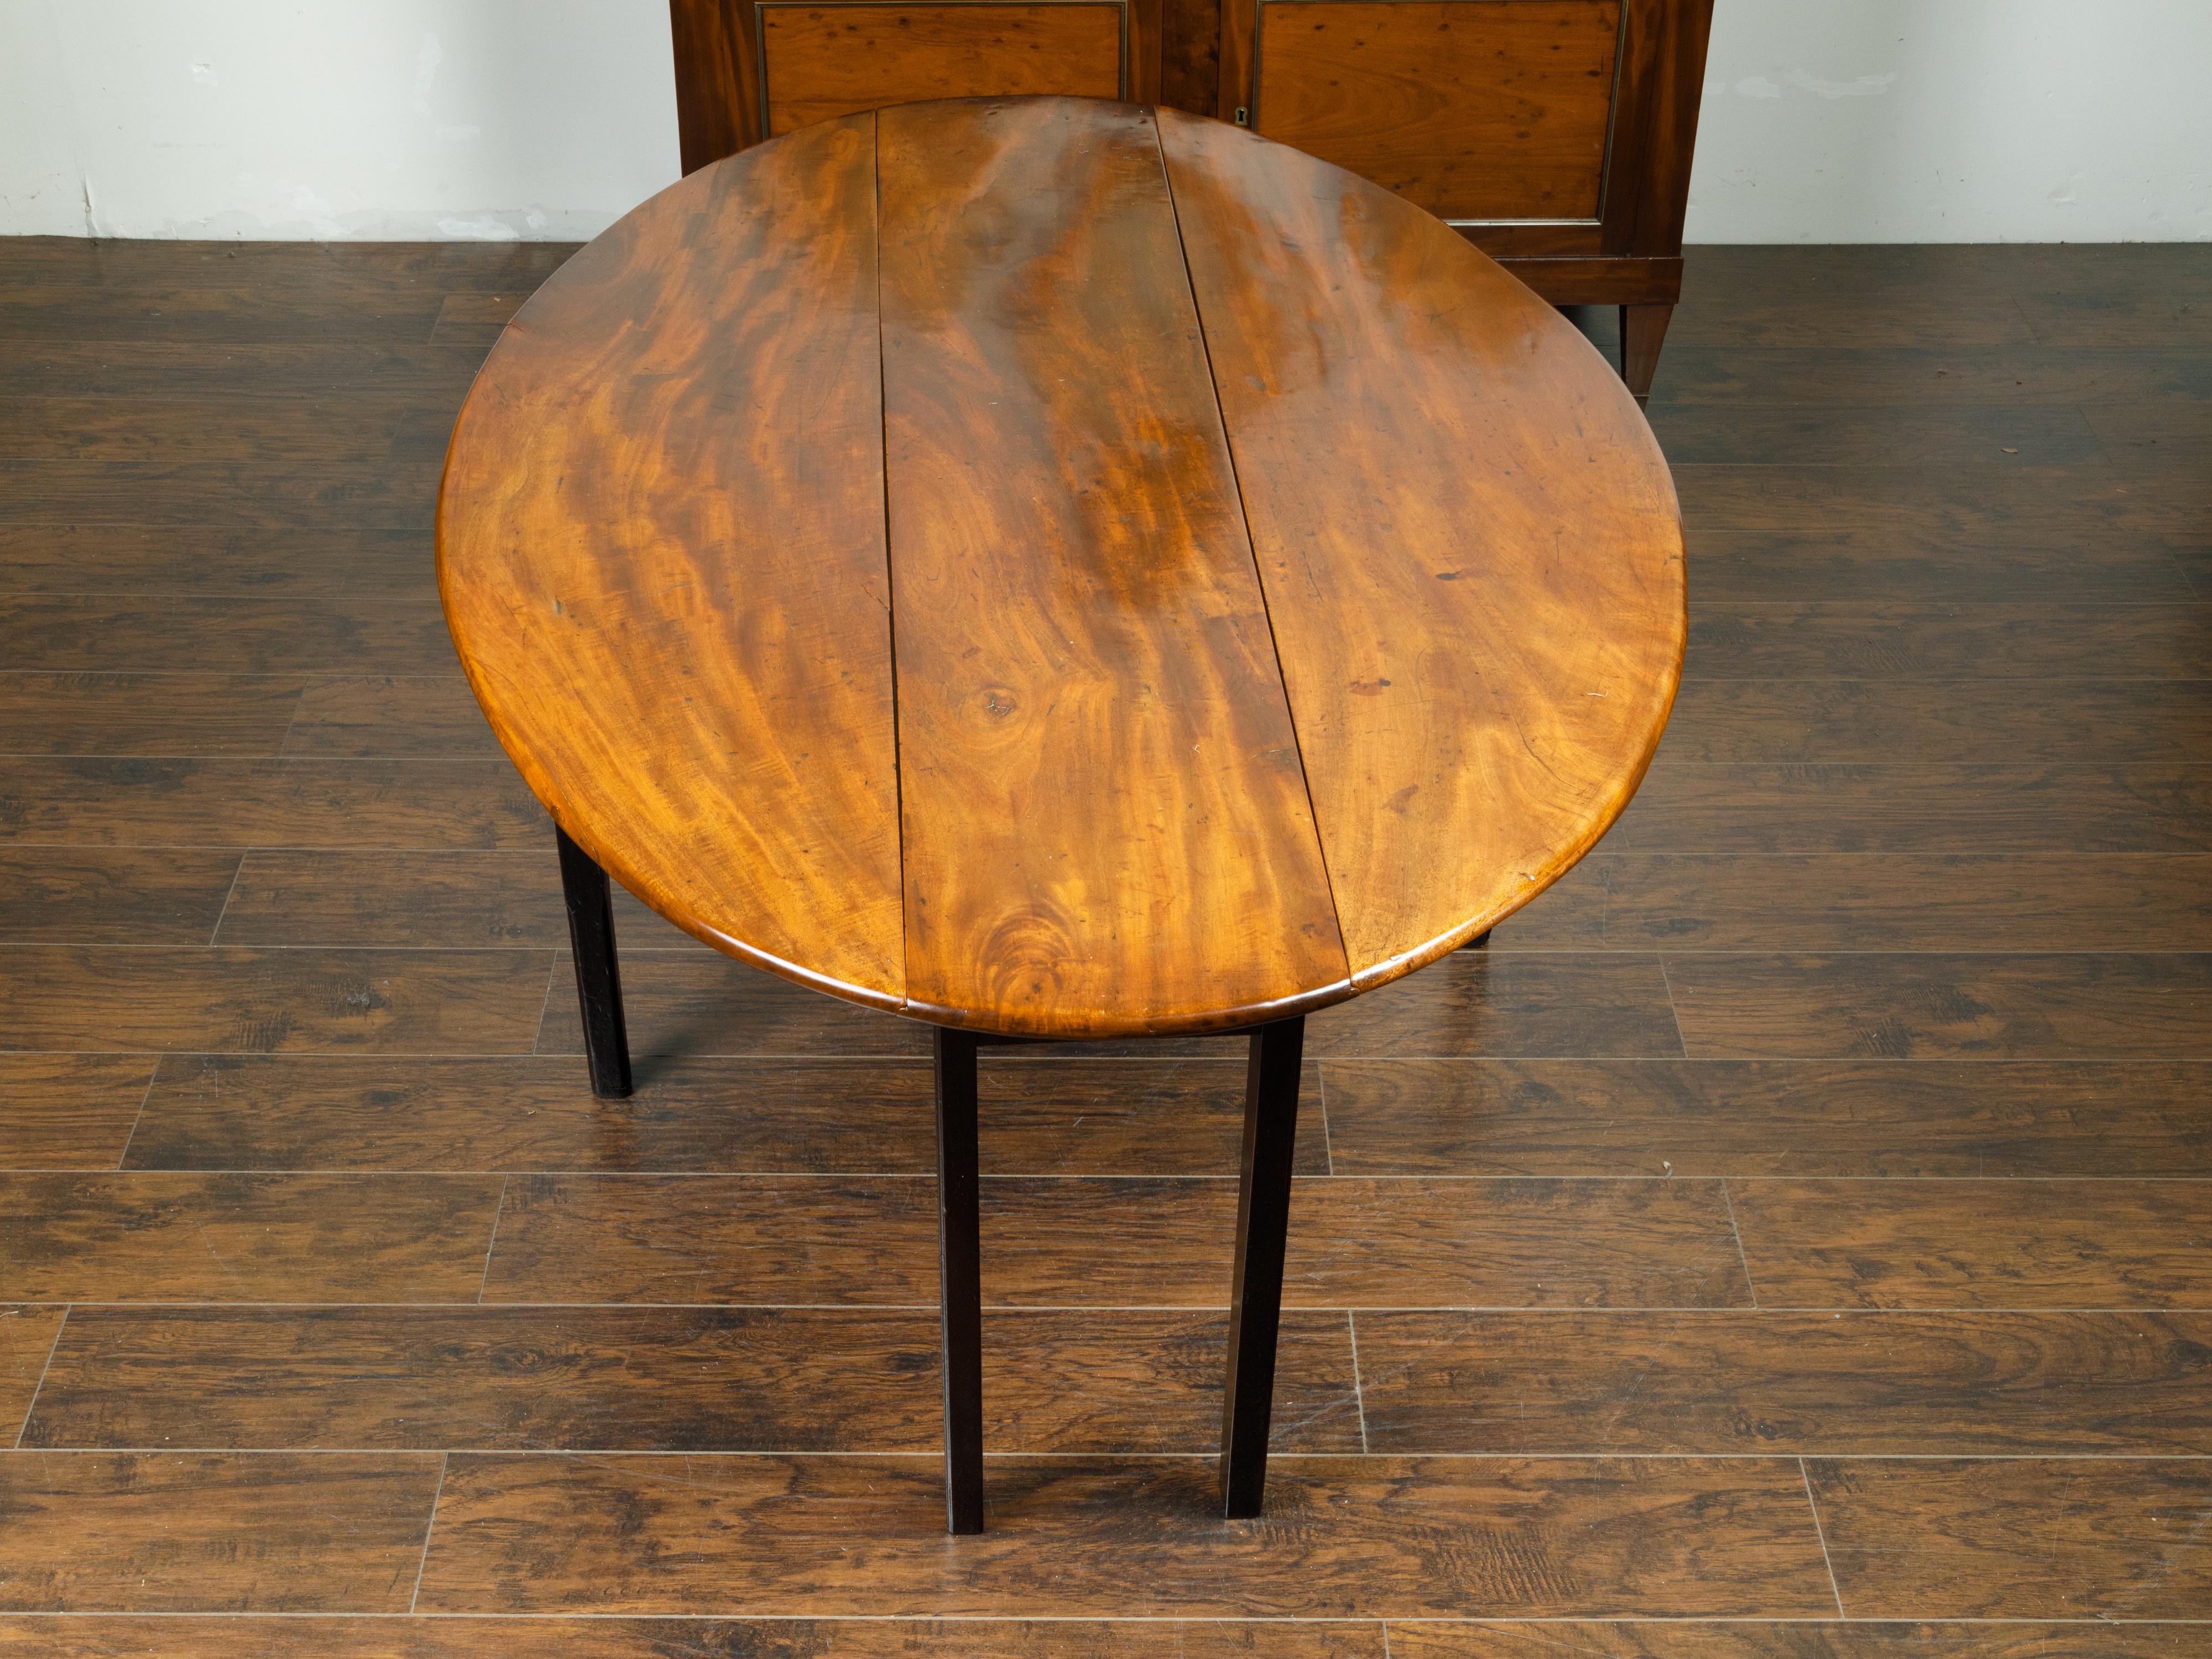 19th Century English 1820s Mahogany Drop Leaf Dining Table with Oval Top and Ebonized Legs